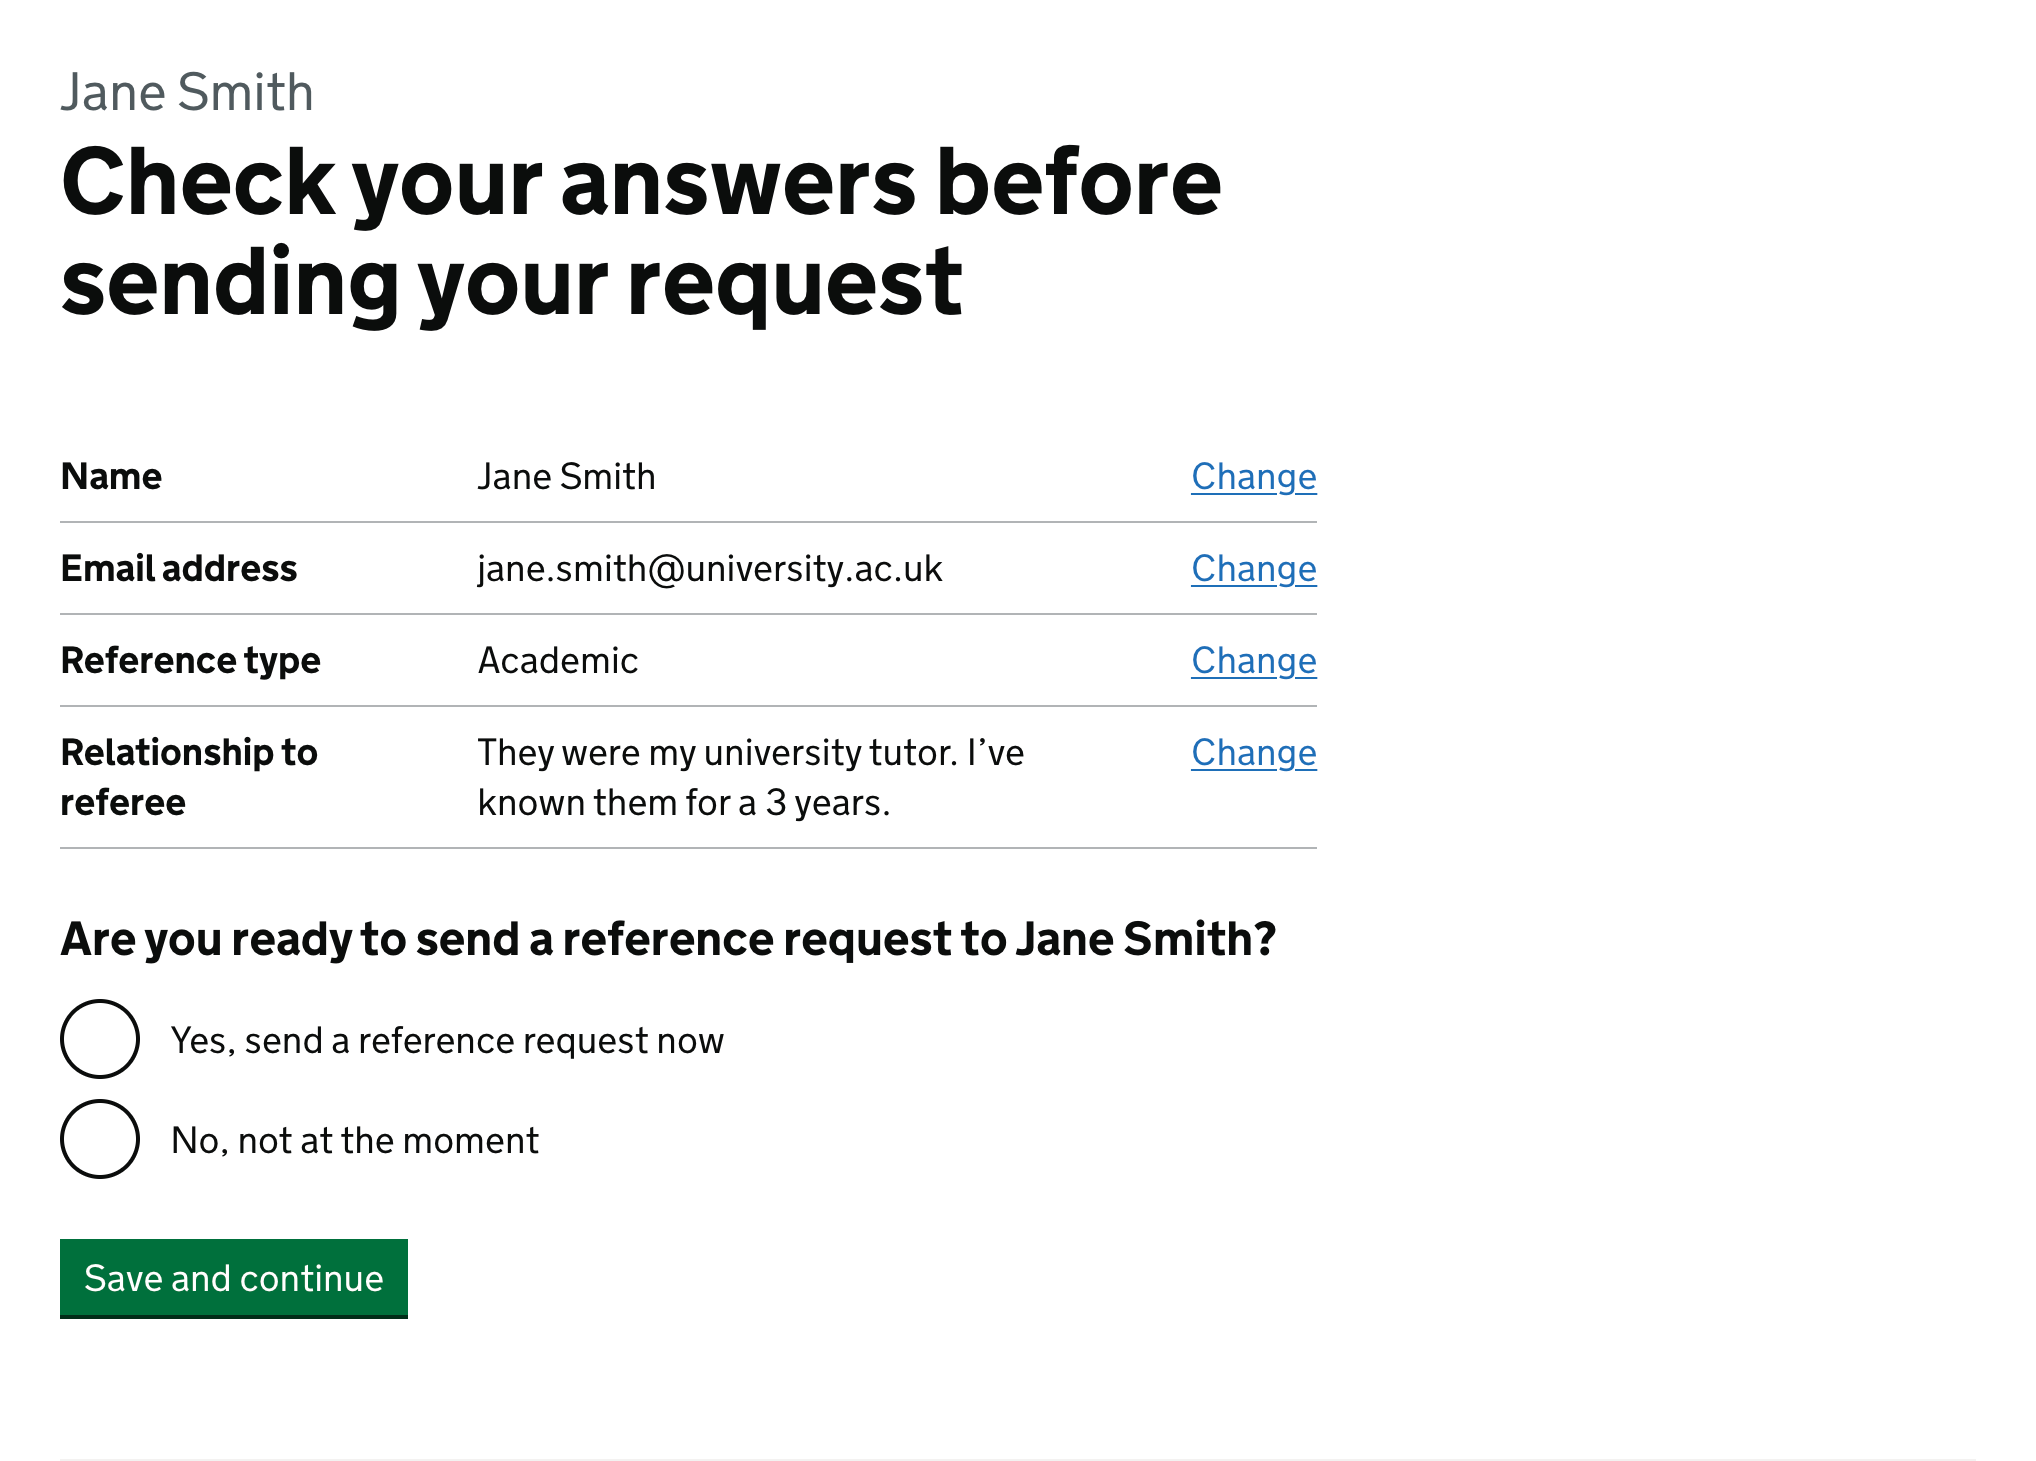 Screenshot showing page with the heading 'Check your answers before sending your request'. The page then summarises the reference questions, and asks 'Are you ready to send a reference request to Jane Smith?' with the options 'Yes, send a reference request now' and 'No, not at the moment'